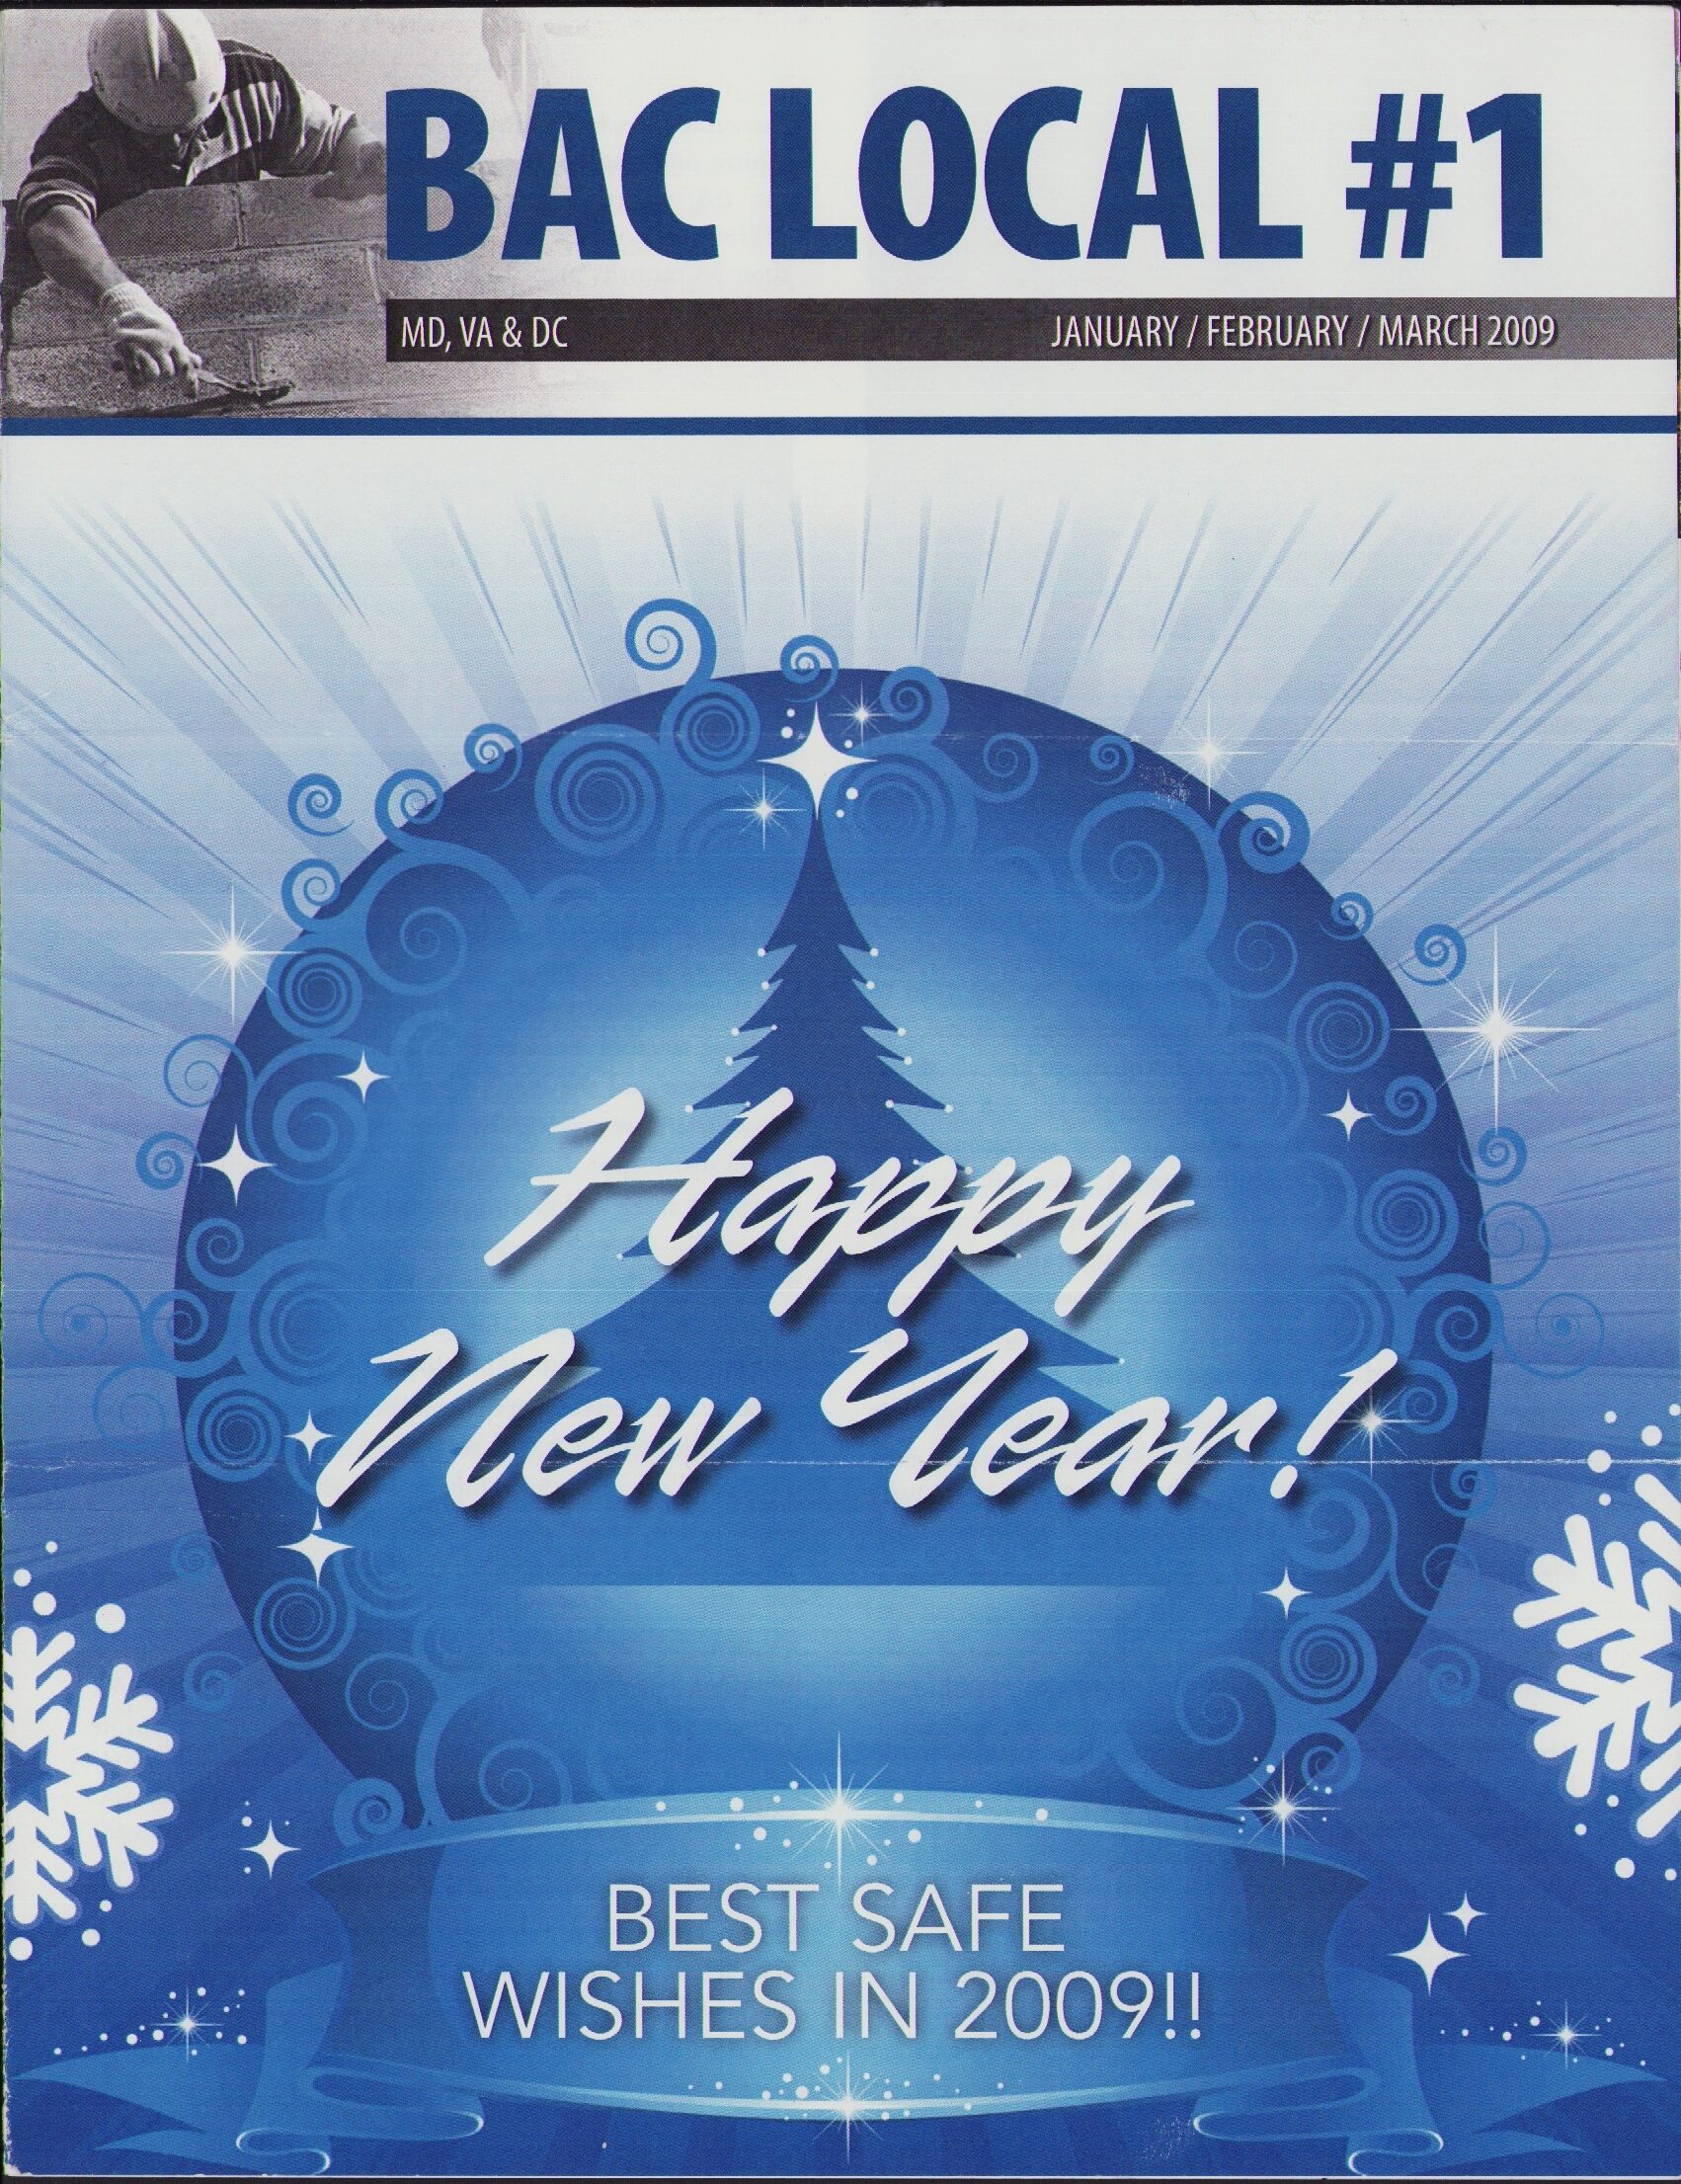 From the Archives – BAC 1 MVD Winter 2009 Newsletter